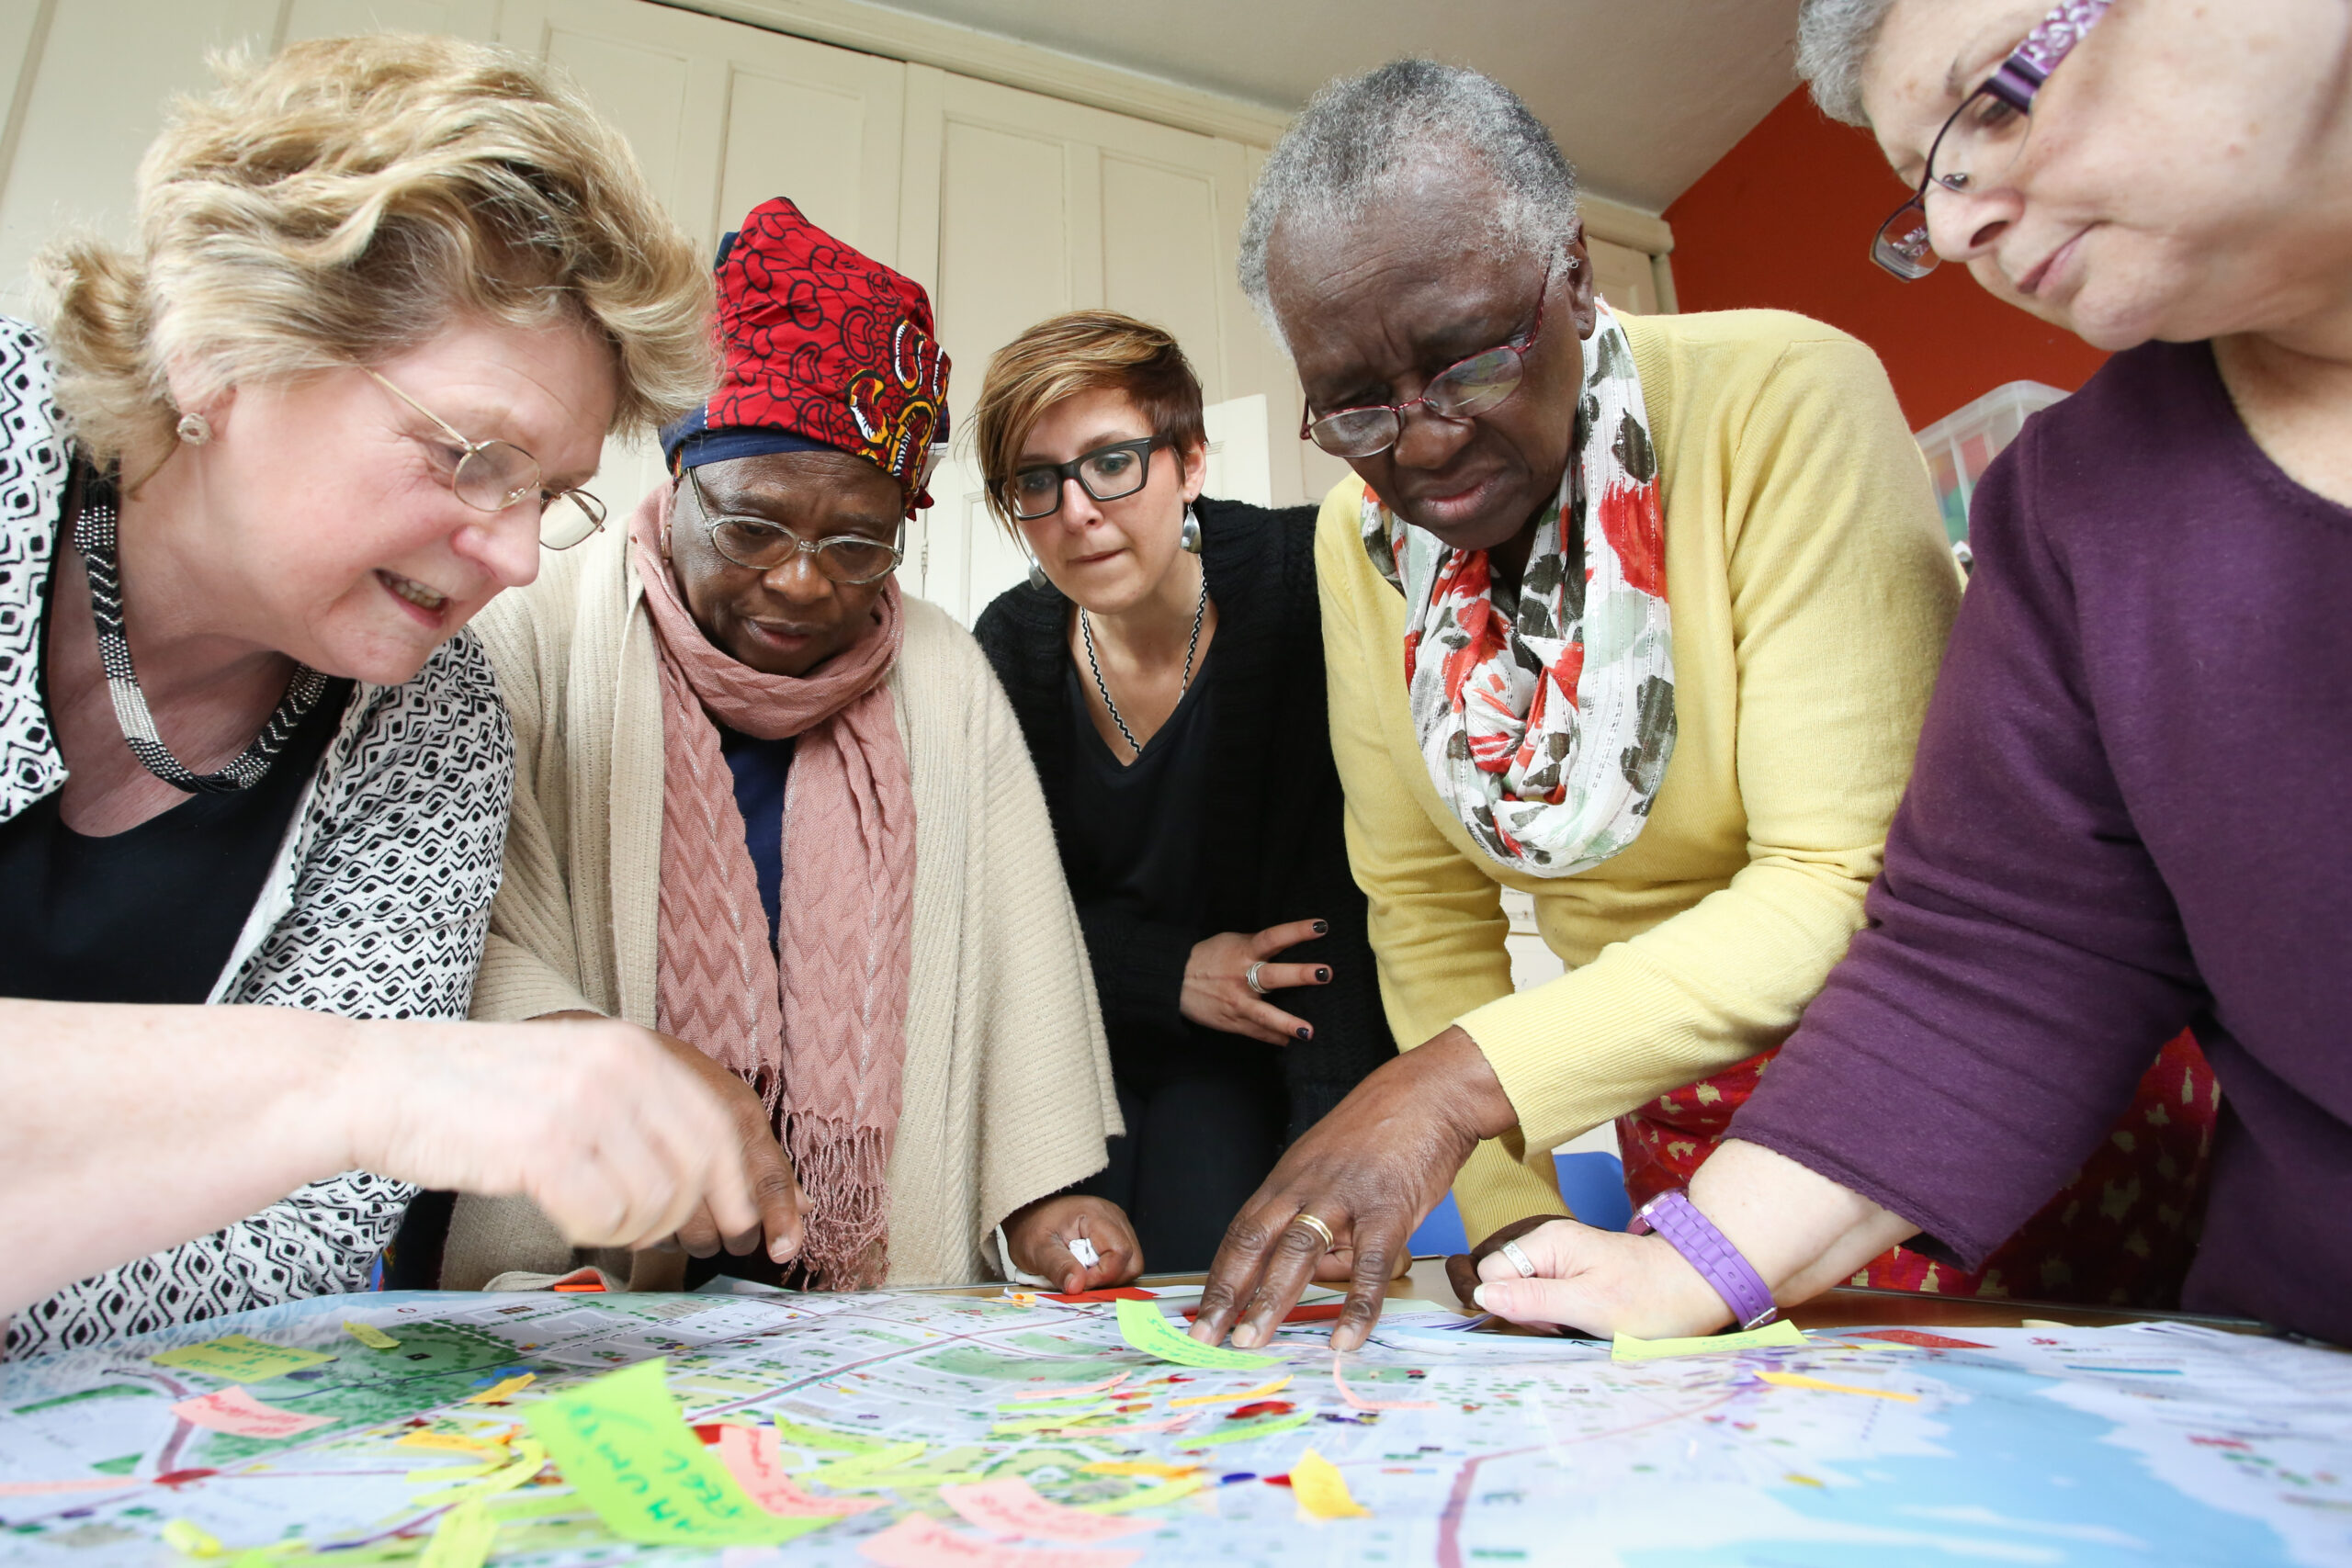 Four people doing an activity on a table with a large world map.